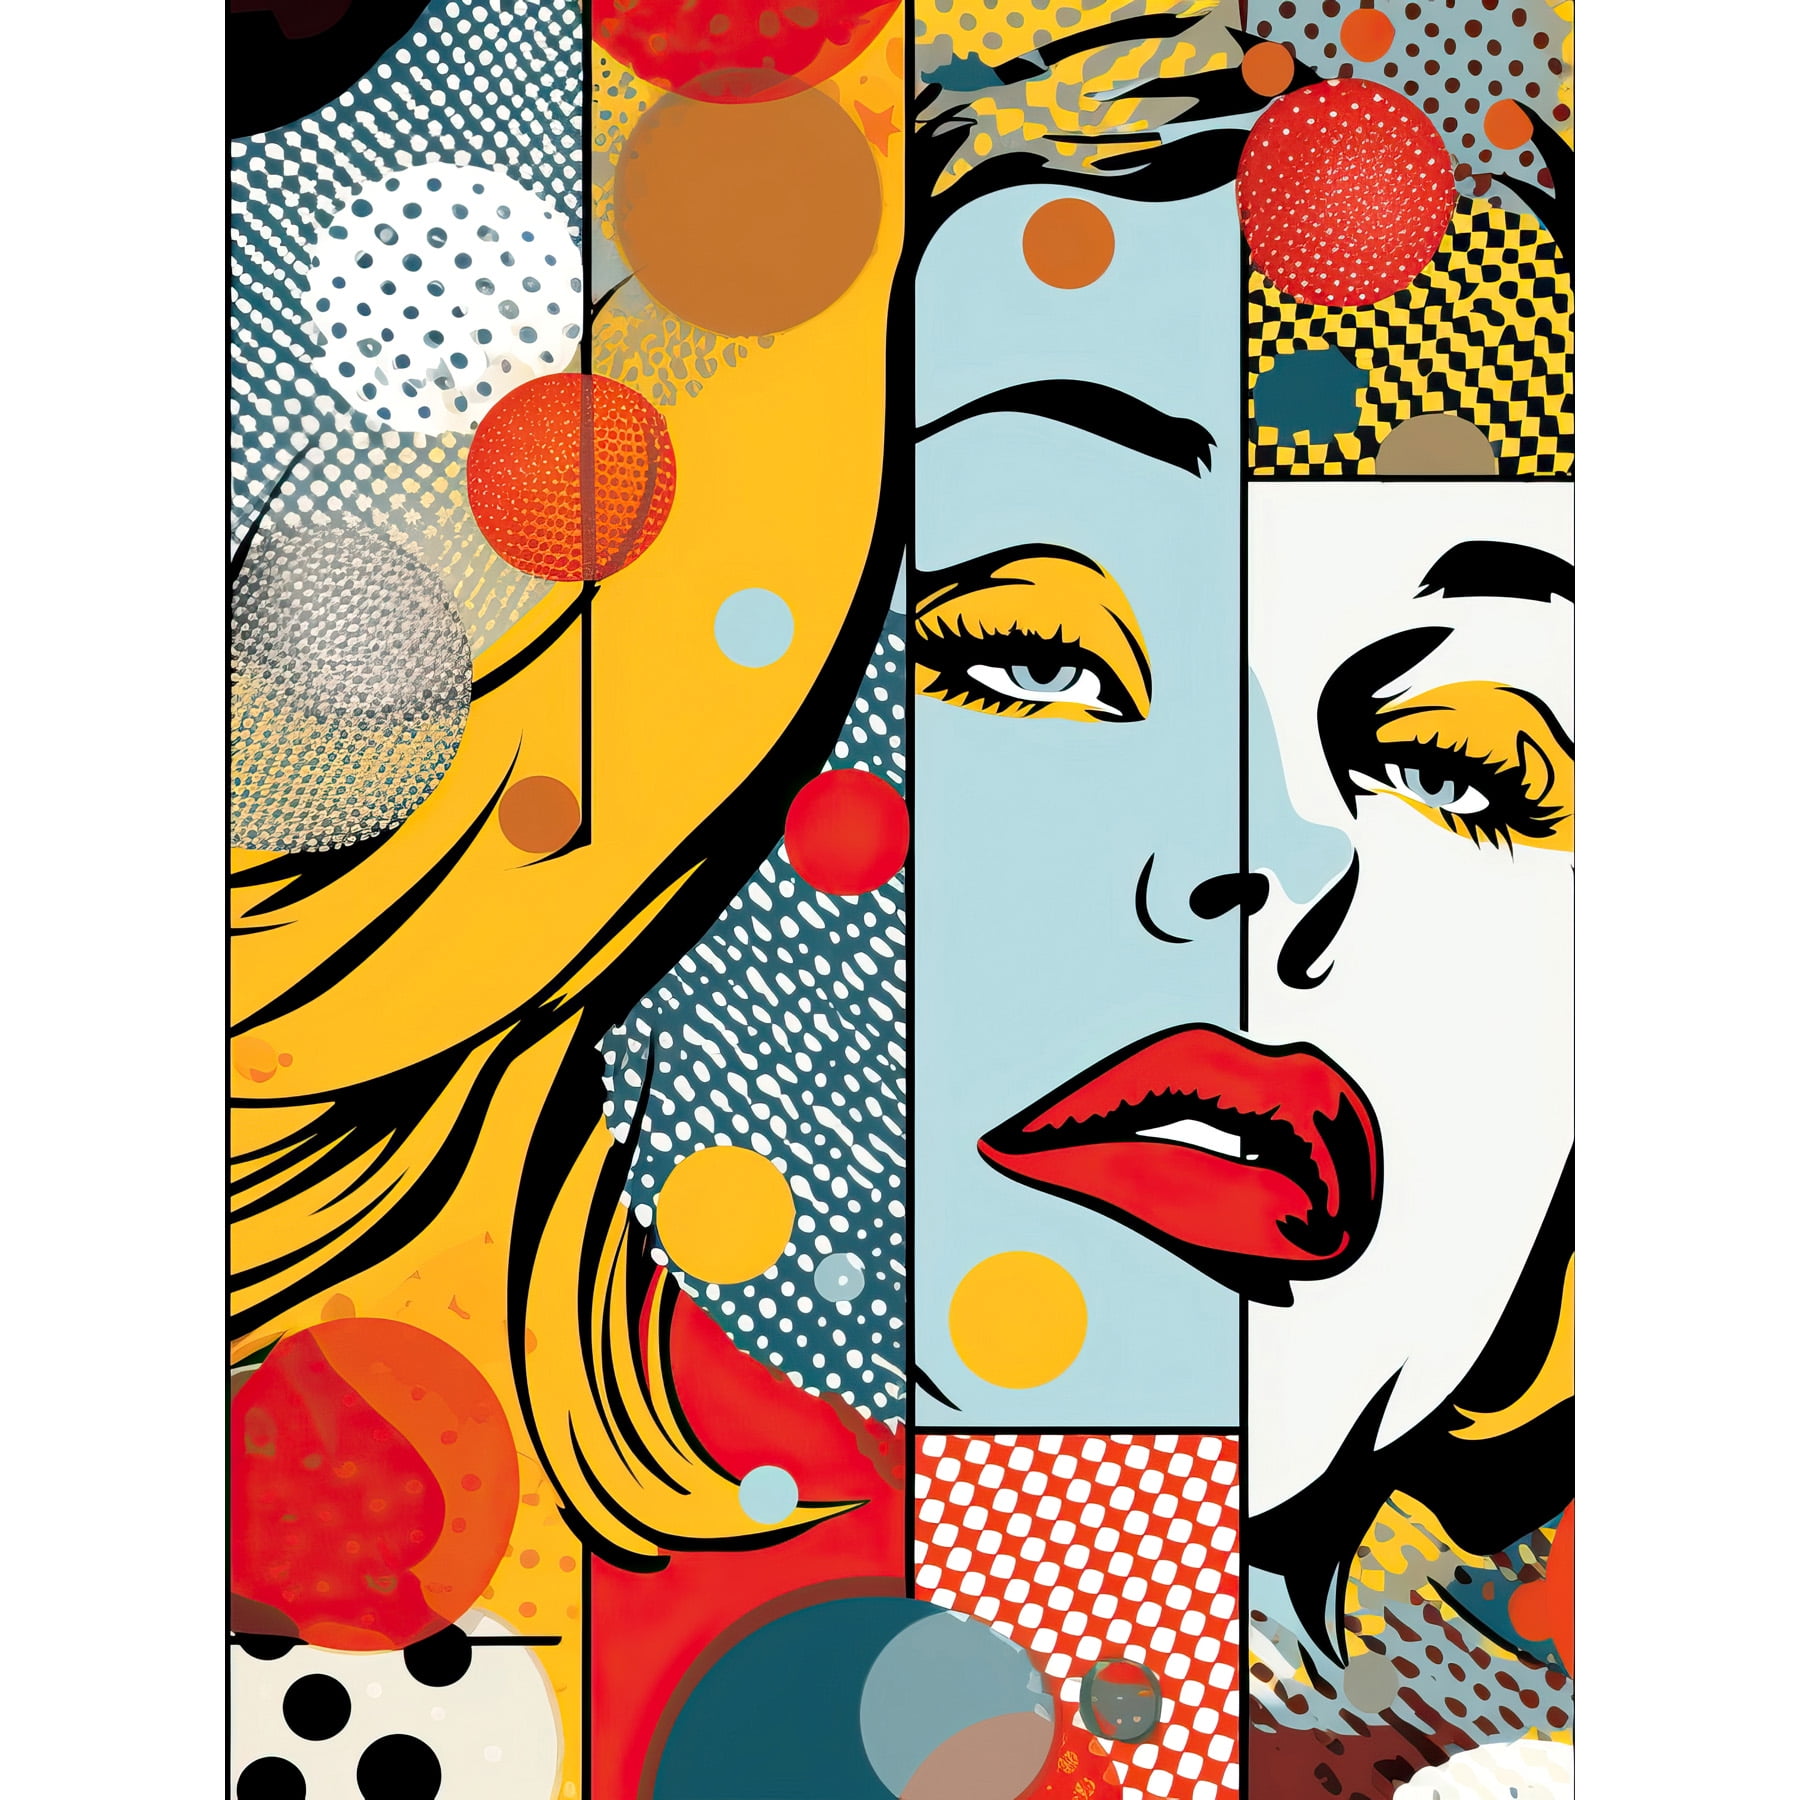 Abstract Geometric Patterns and Bubbles with Woman Face Comic Book Style  Pop Art Halftone Art Print Framed Poster Wall Decor 12x16 inch